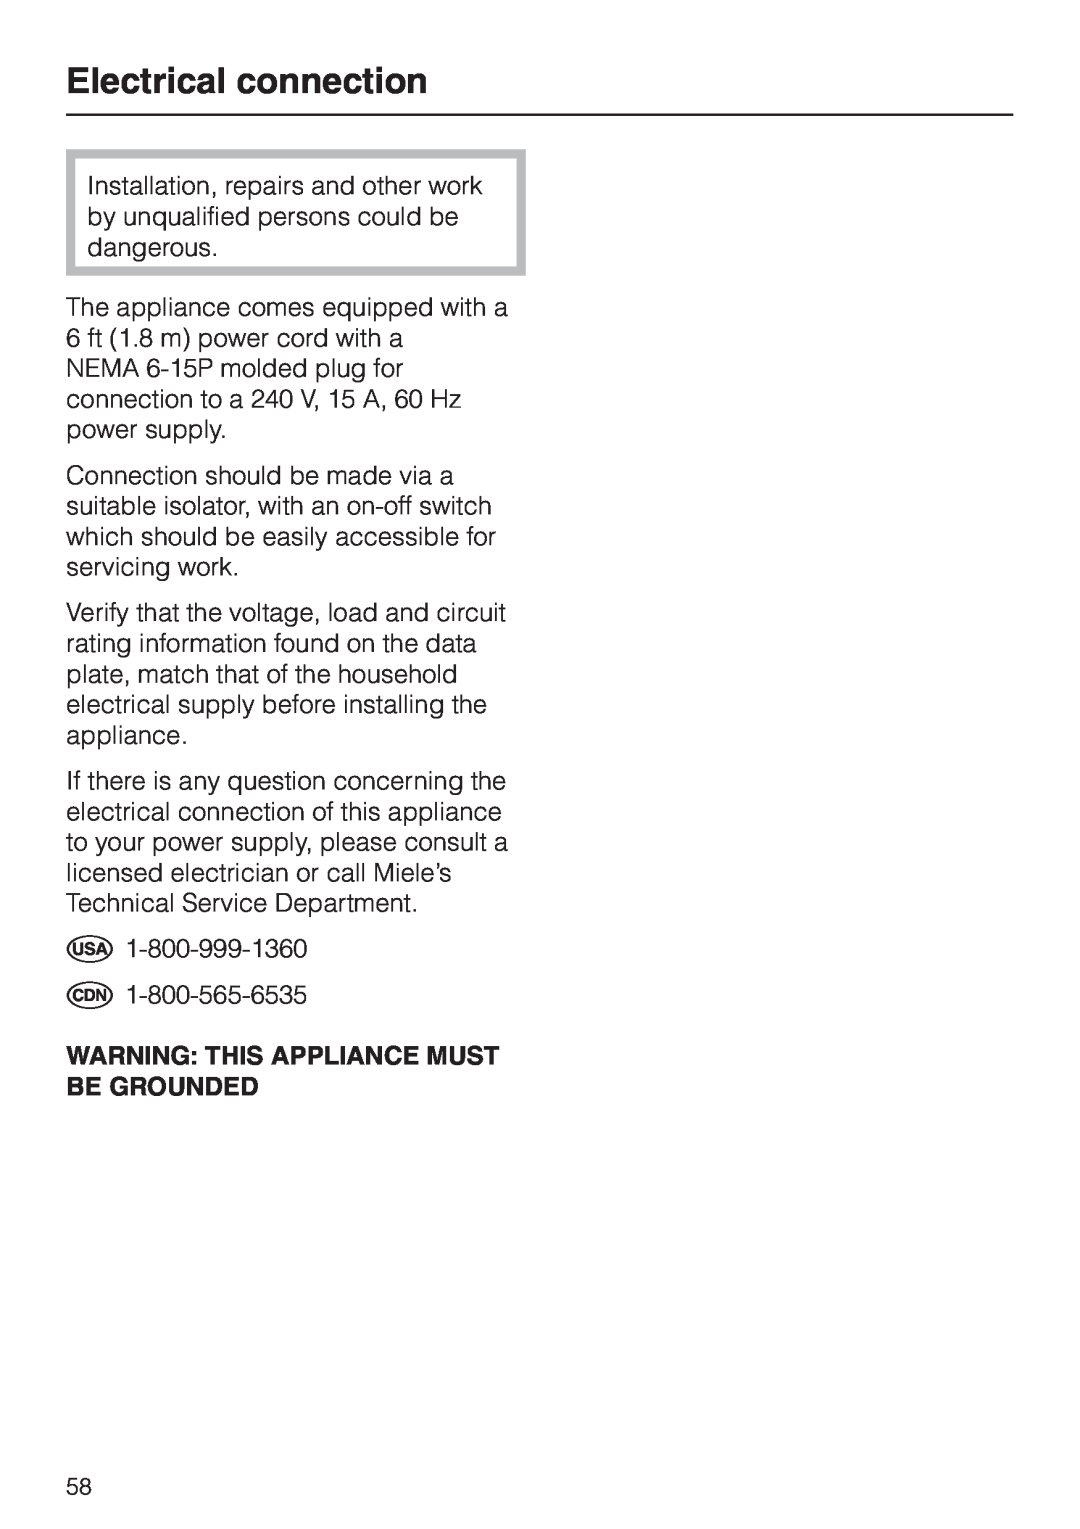 Miele DG 2661 installation instructions Electrical connection, Warning This Appliance Must Be Grounded 